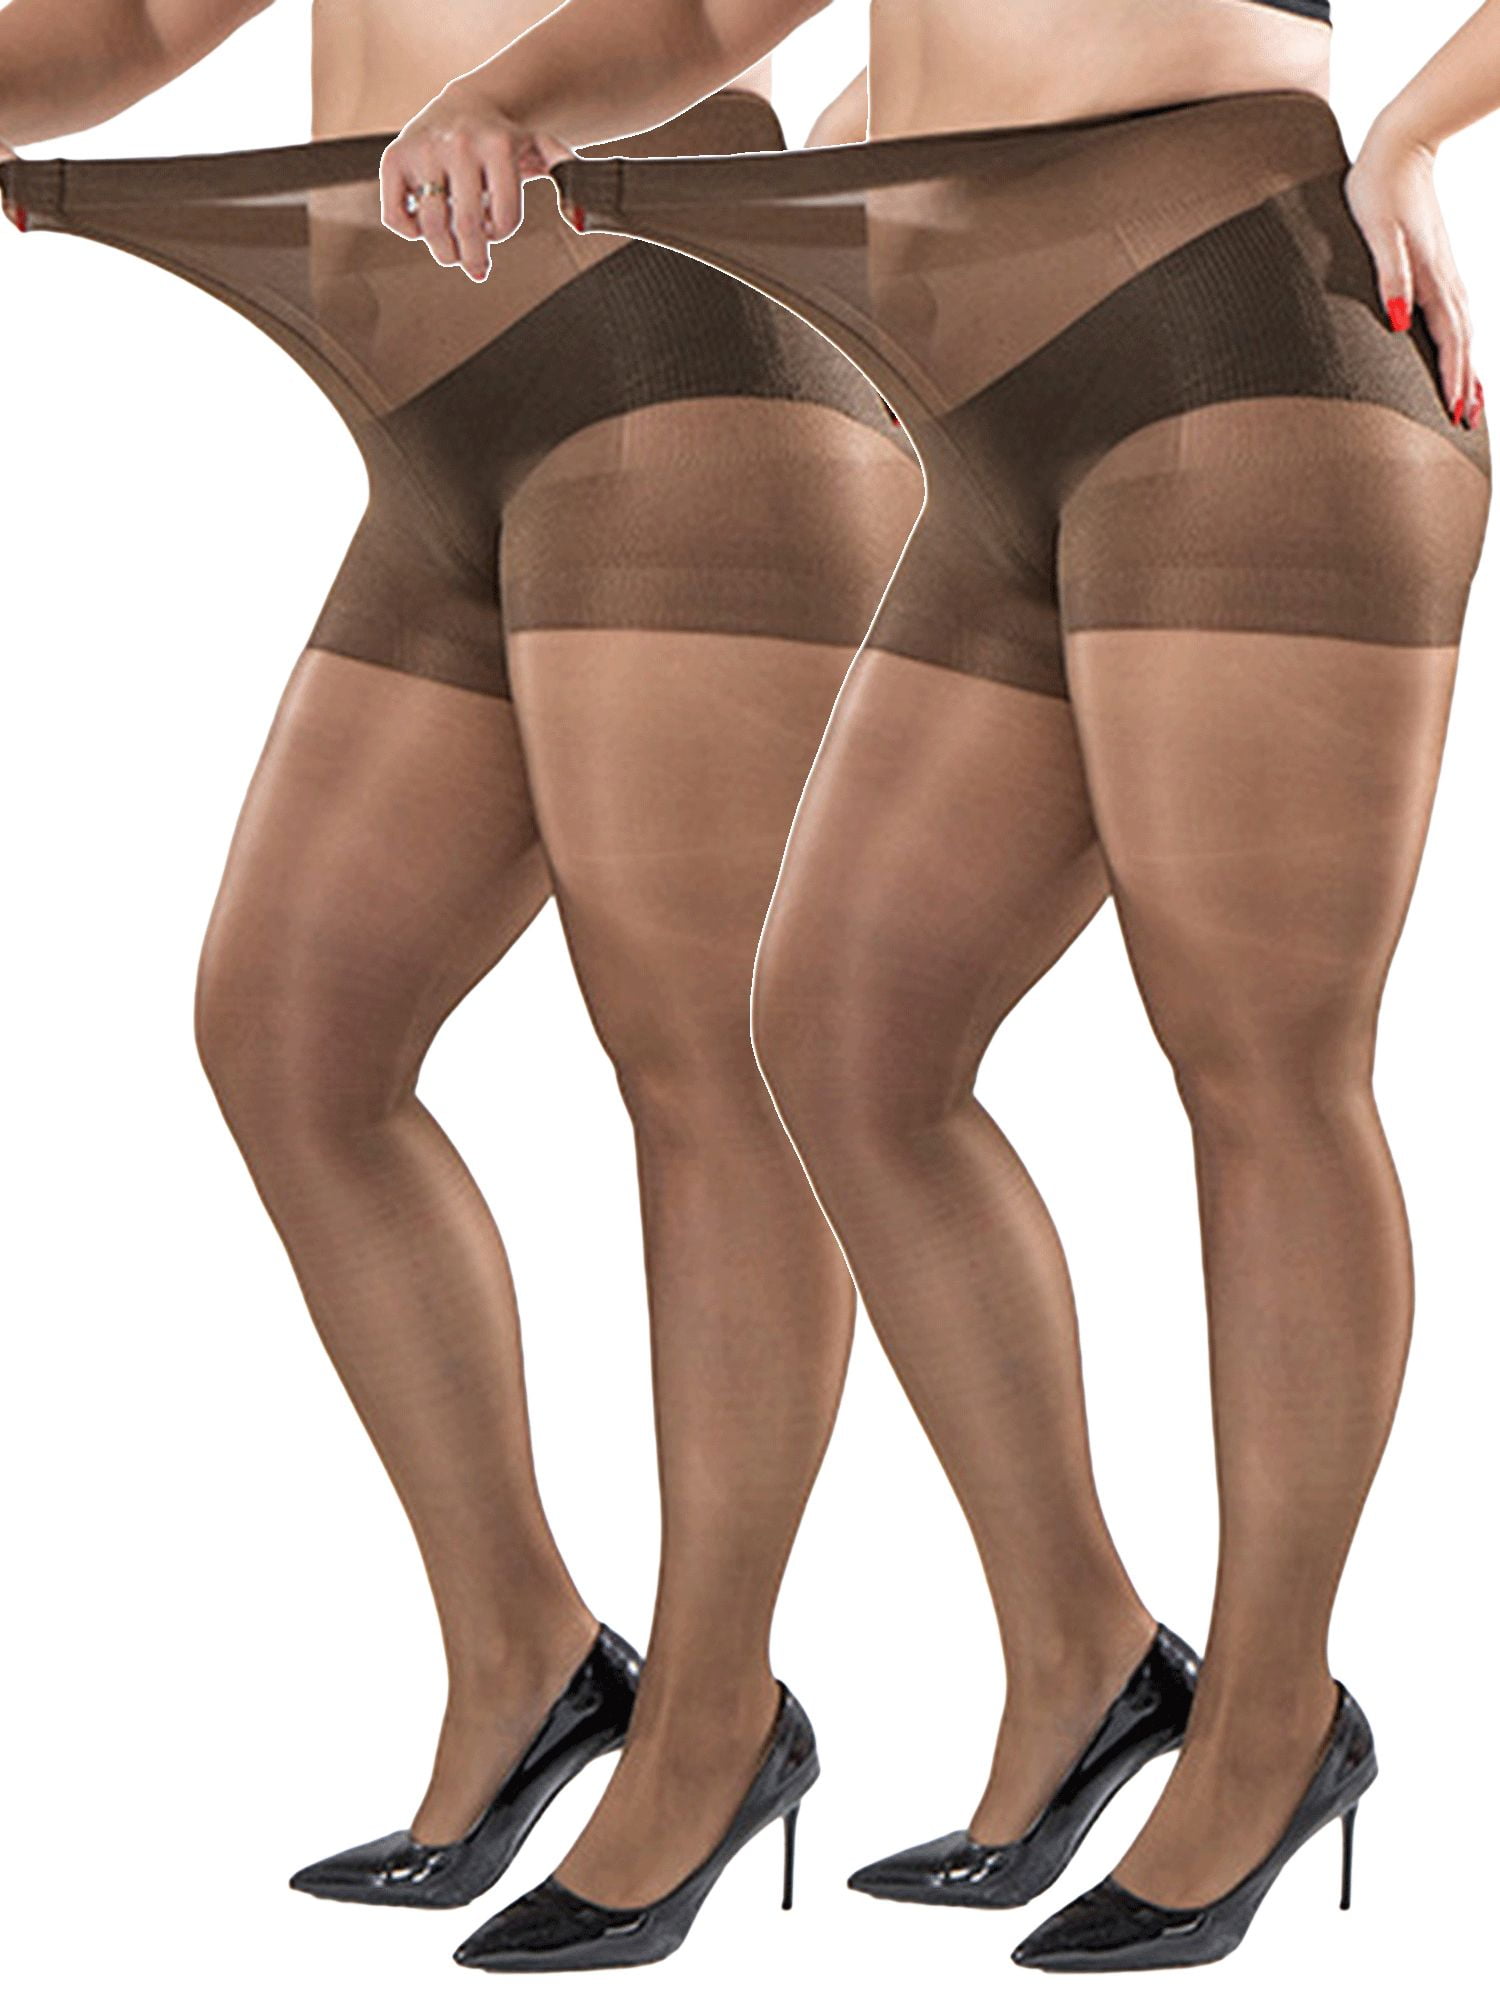 Spencer Plus Size Womens Ultra Sheer Tights Control Top Pantyhose with Reinforced Toes, 2 Pack picture photo